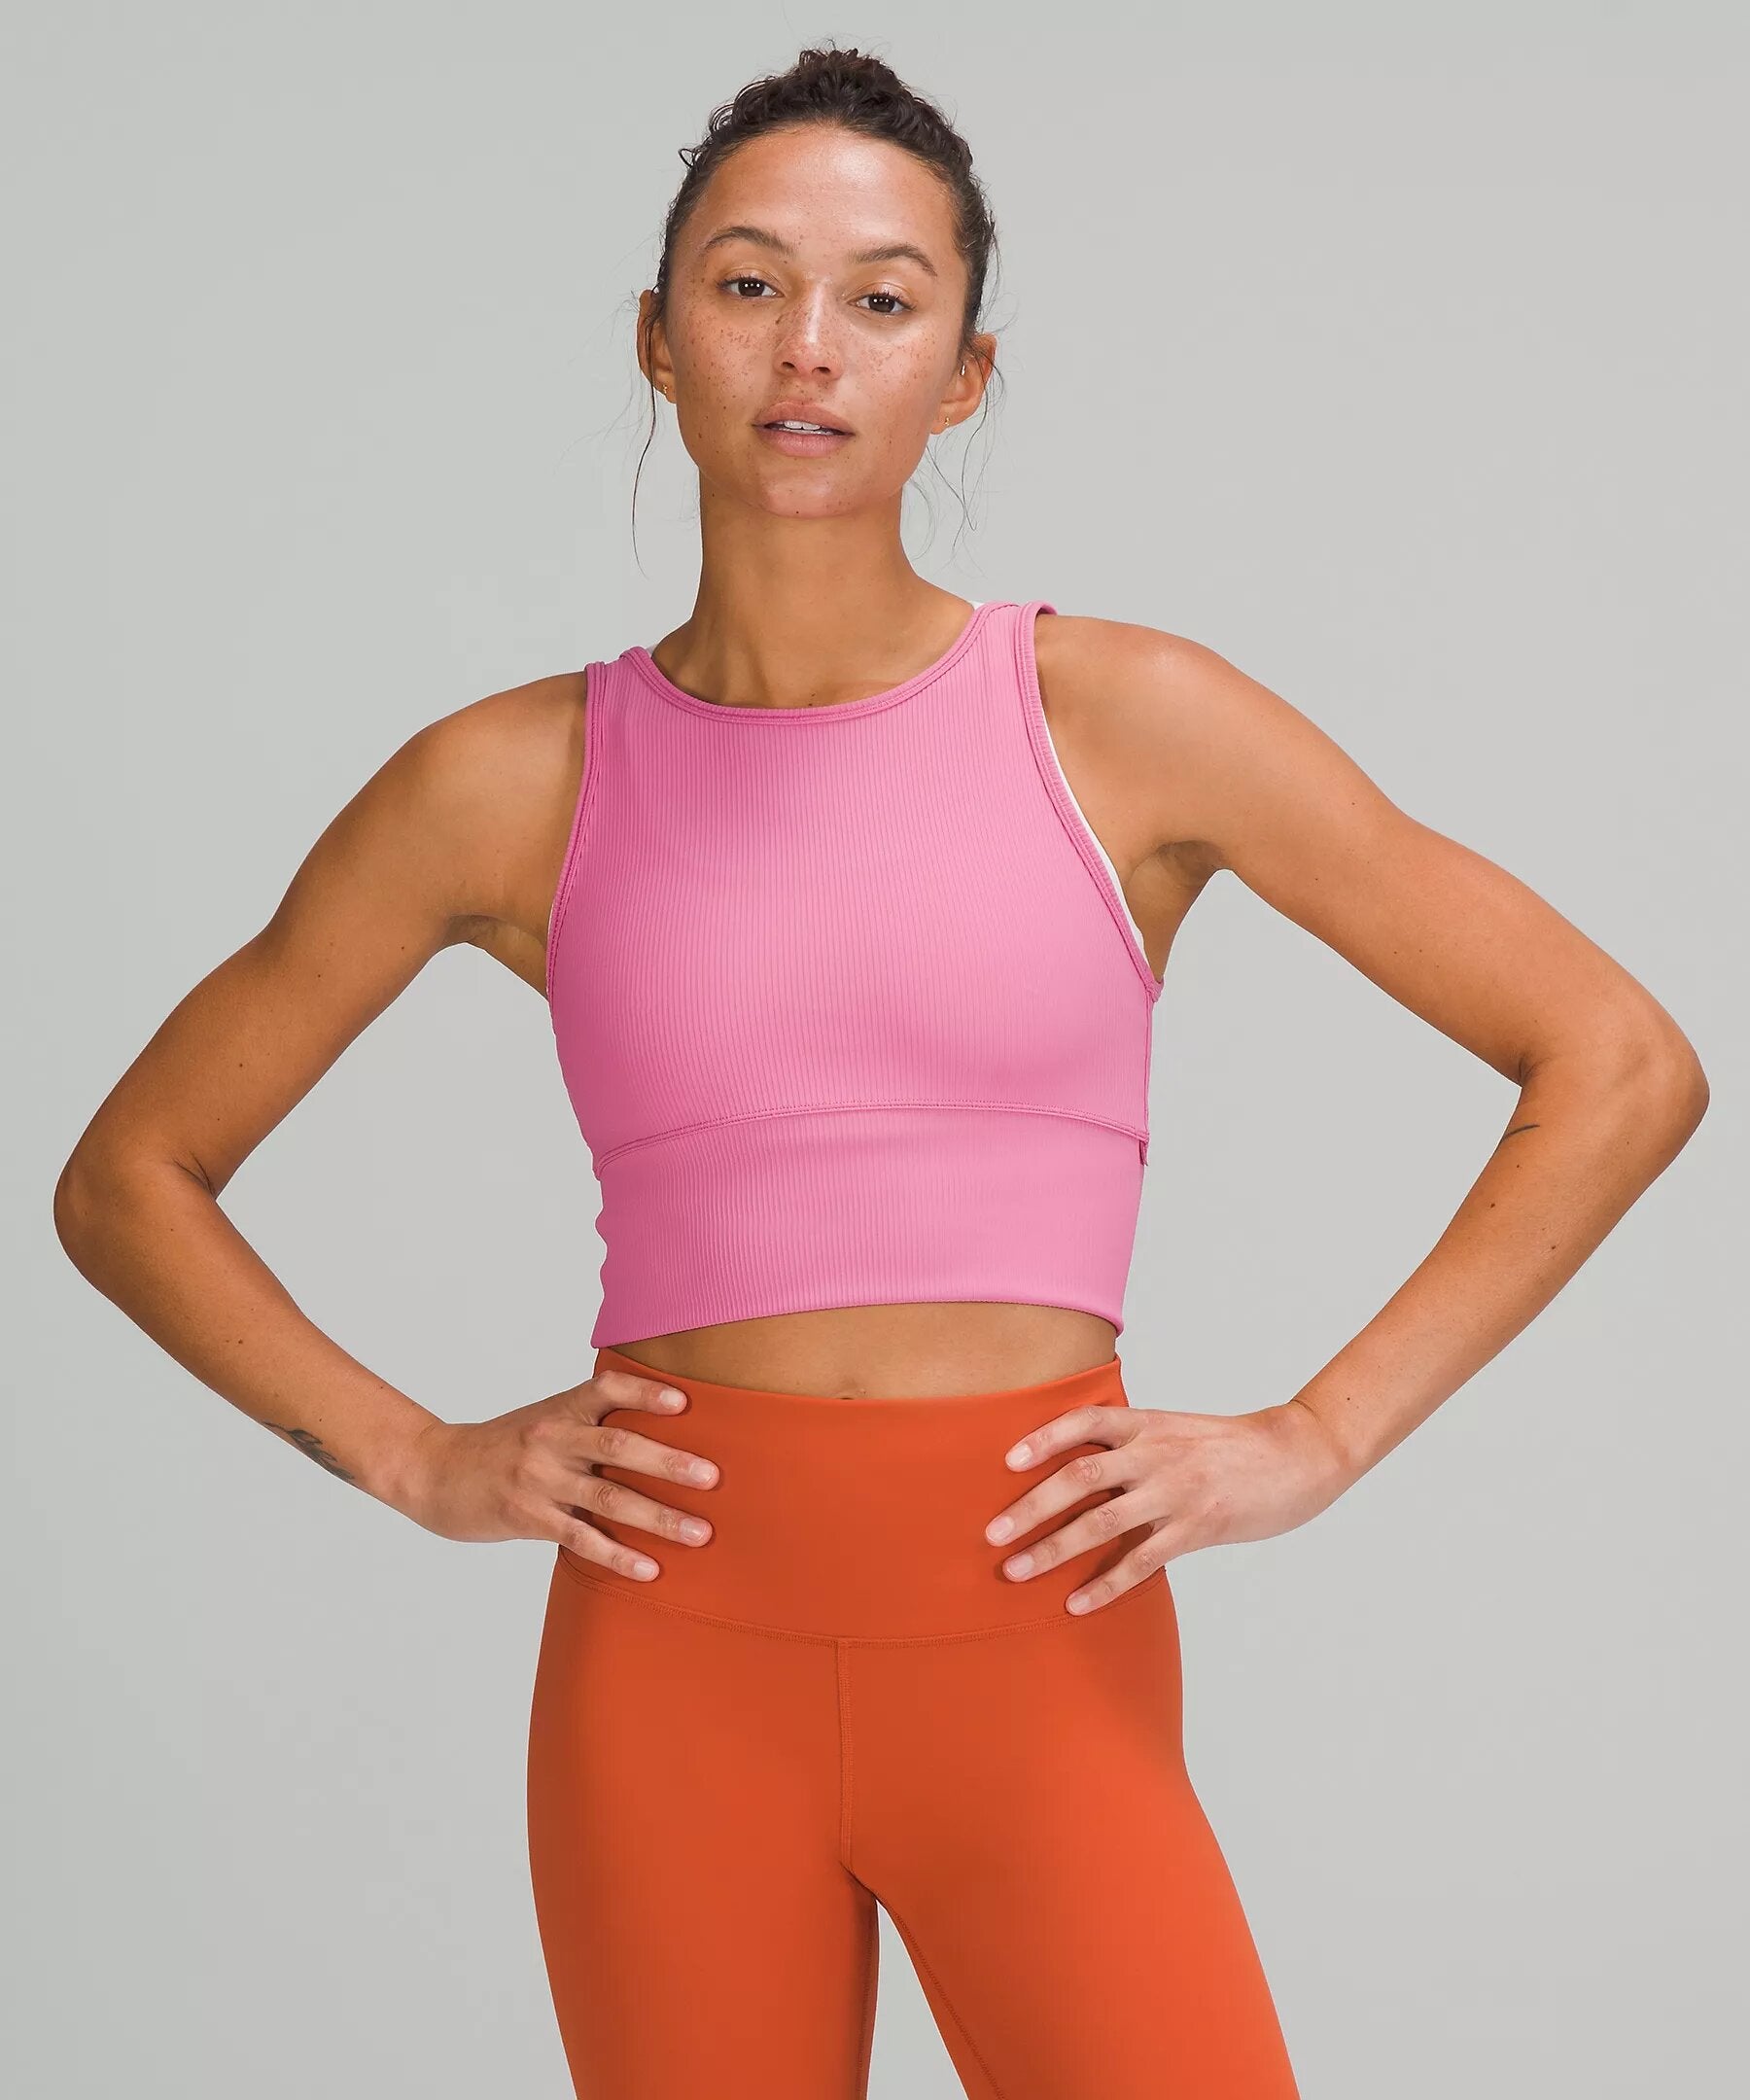 Lululemon Align vs. Uniqlo Bra Top: Tried and tested